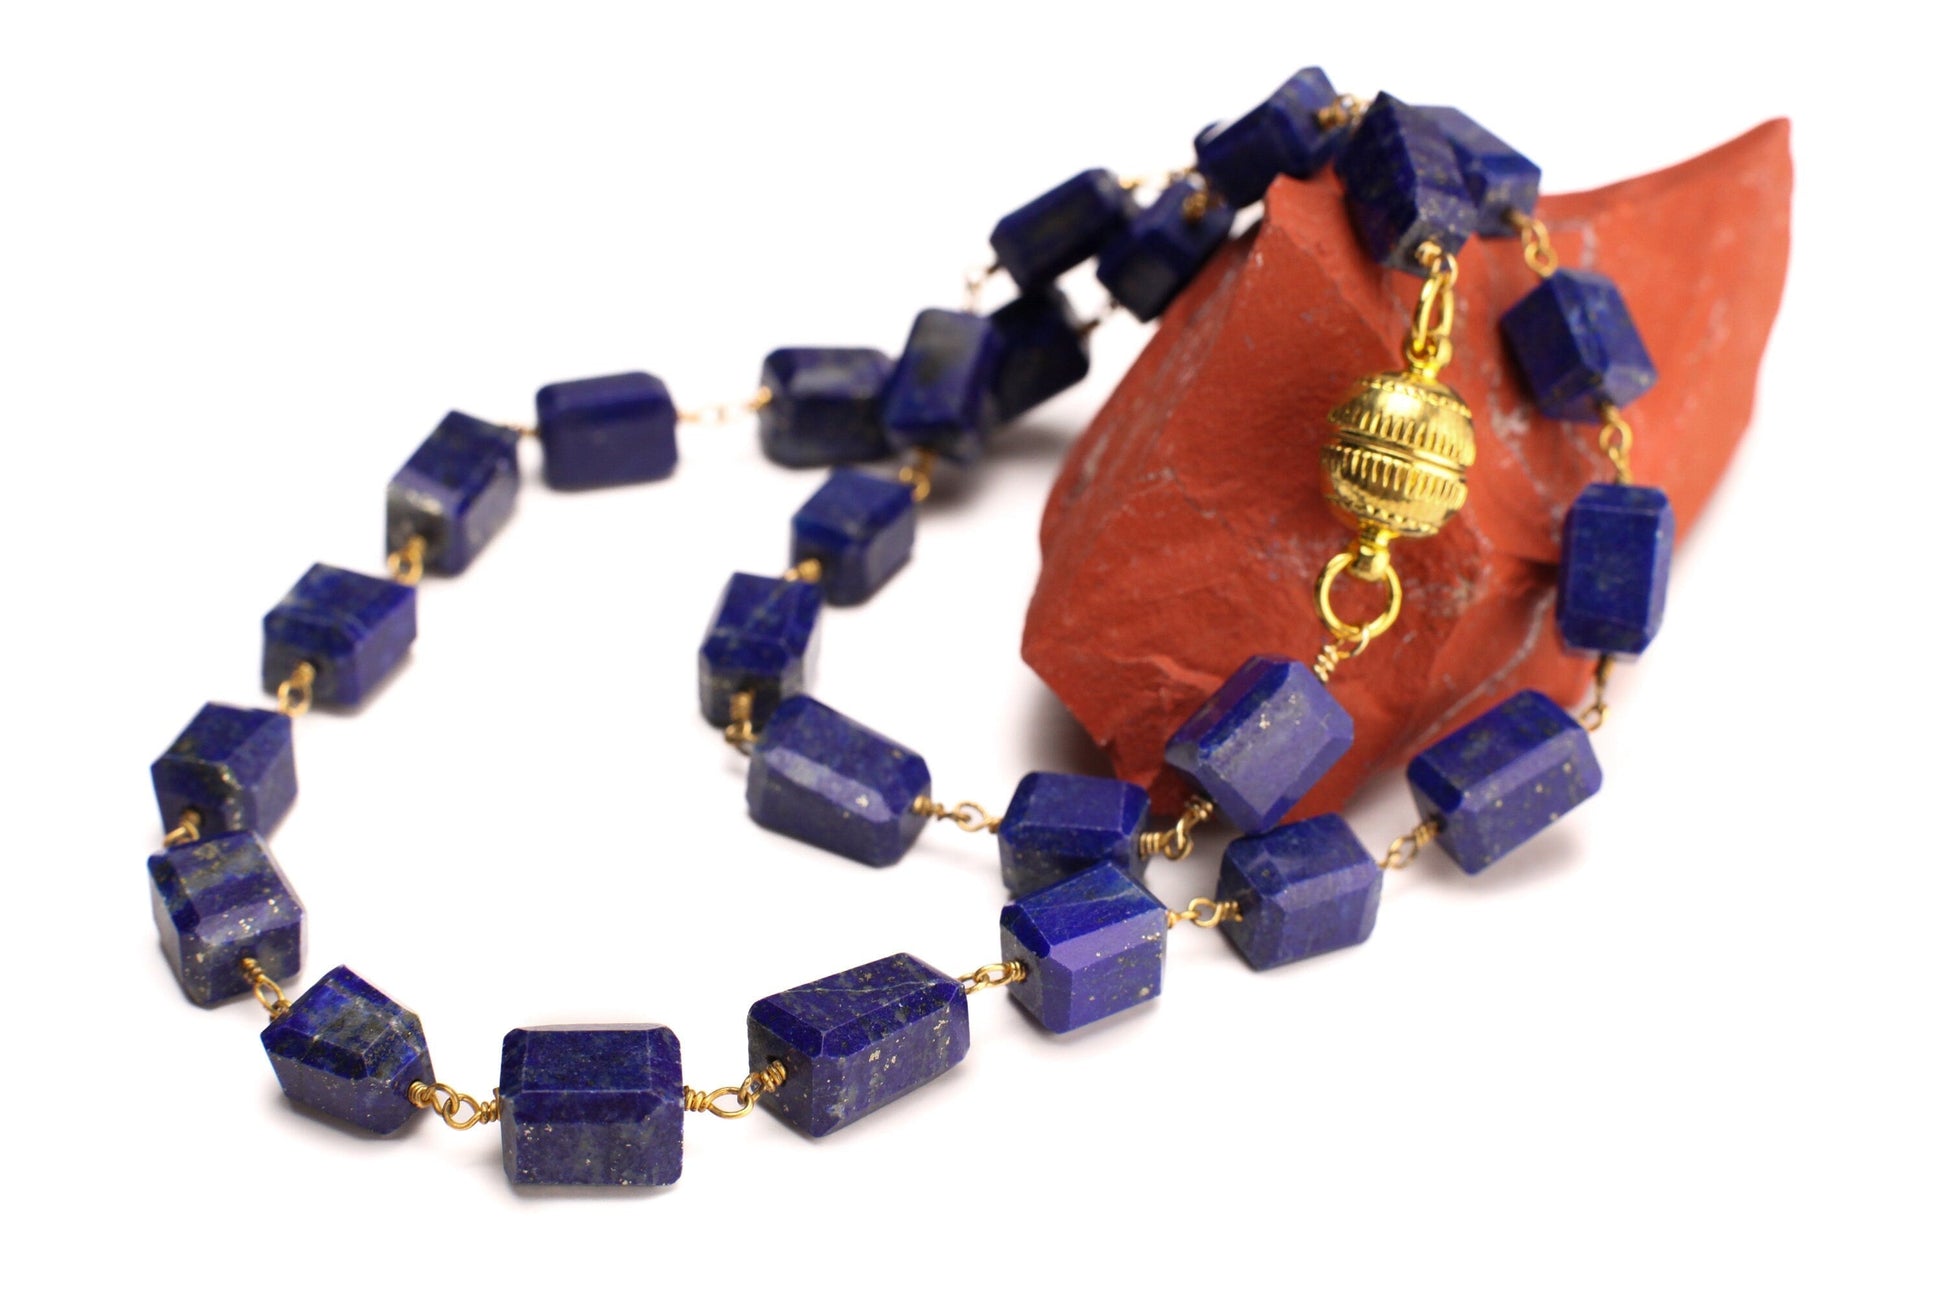 Genuine Lapis Lazuli Free Form Raw Faceted Rectangular 9-12mm Pillars Wire Wrapped gold Necklace Strong Magnetic Clasp,chakra healing gift